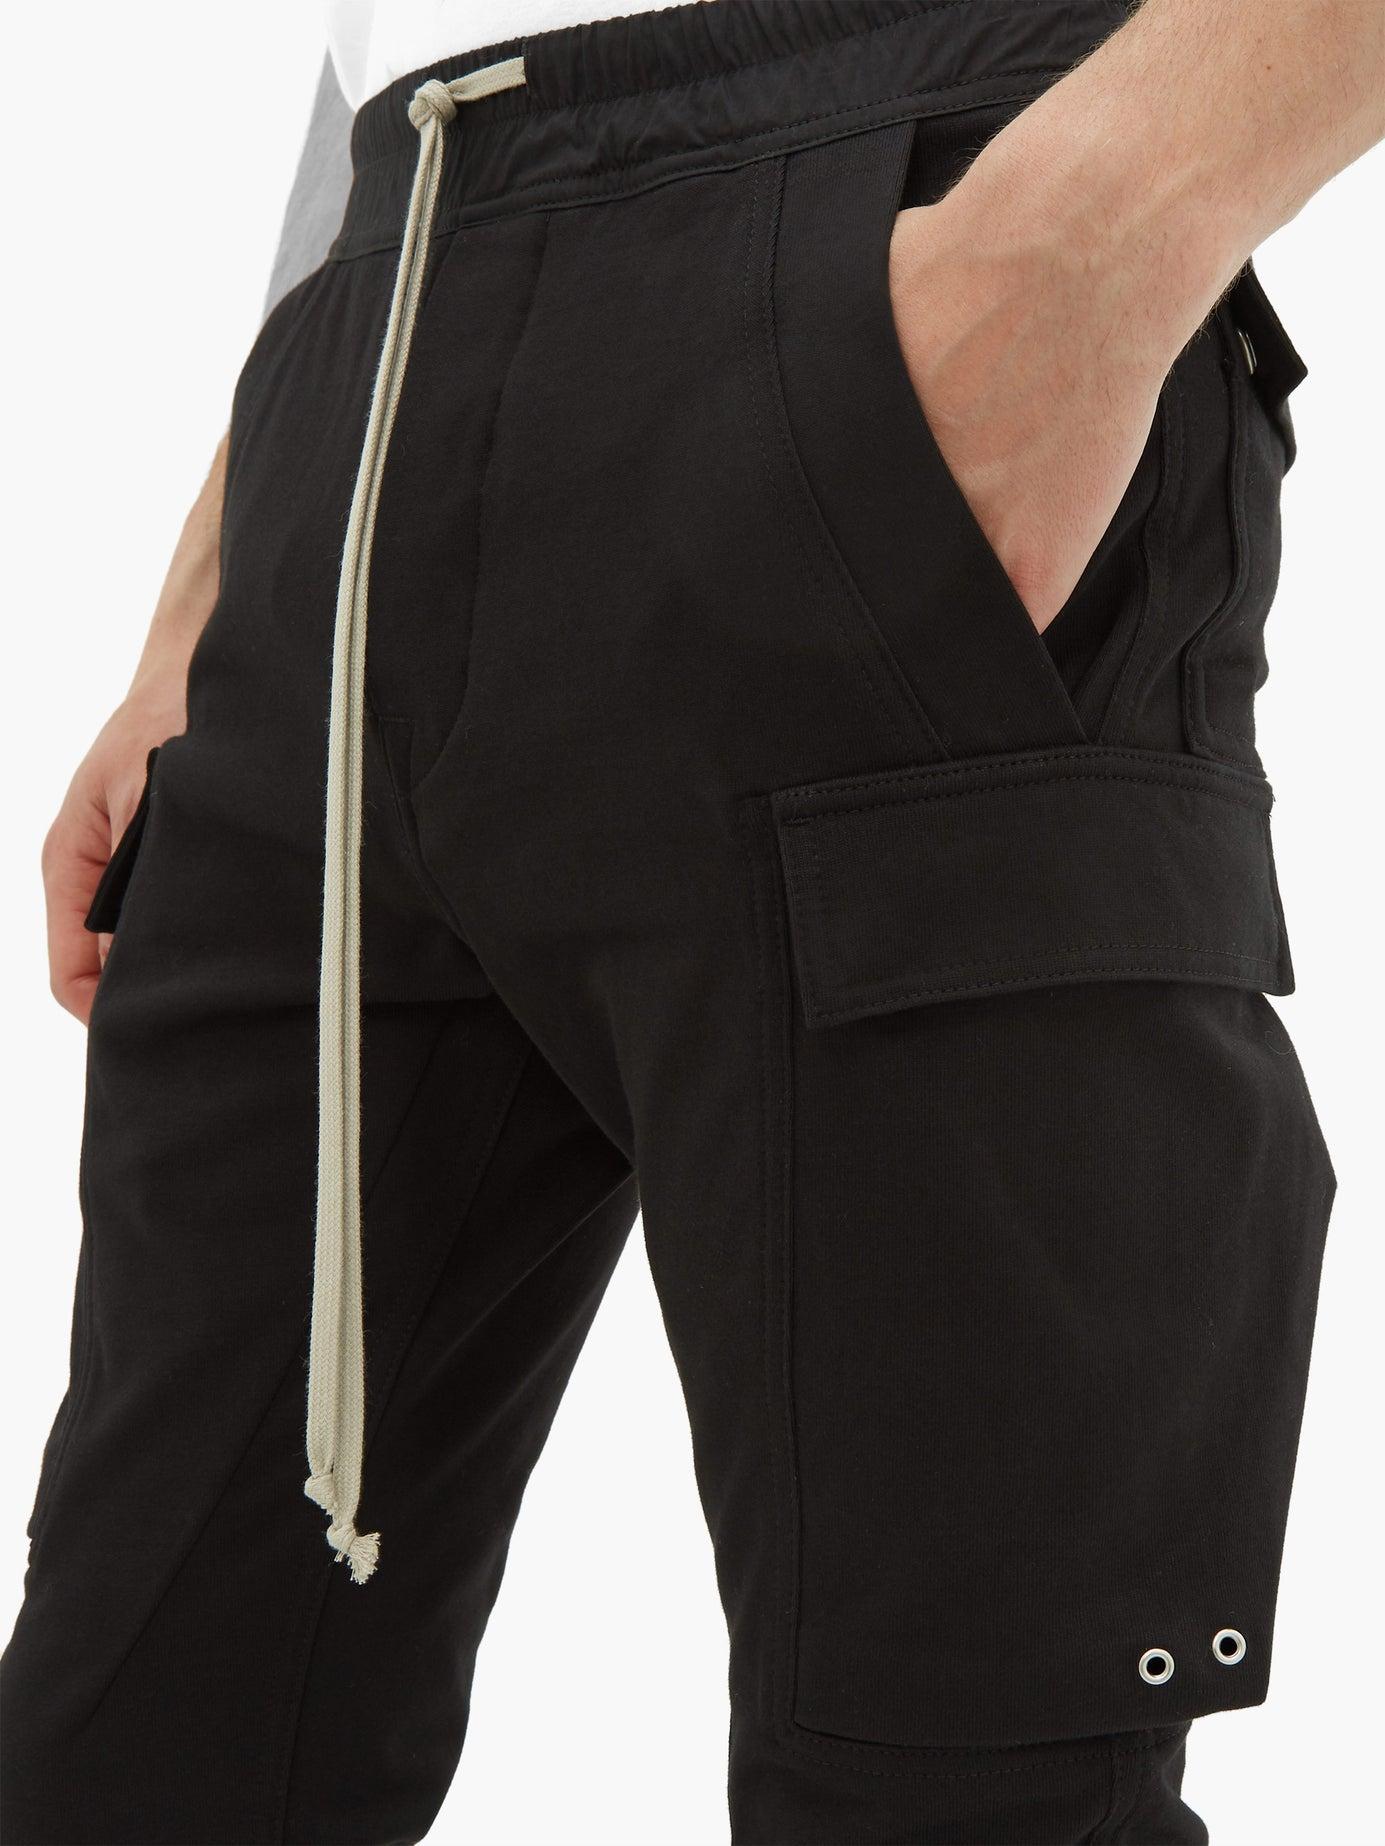 Rick Owens Babel Drawstring Cotton-cargo Track Pants in Black for